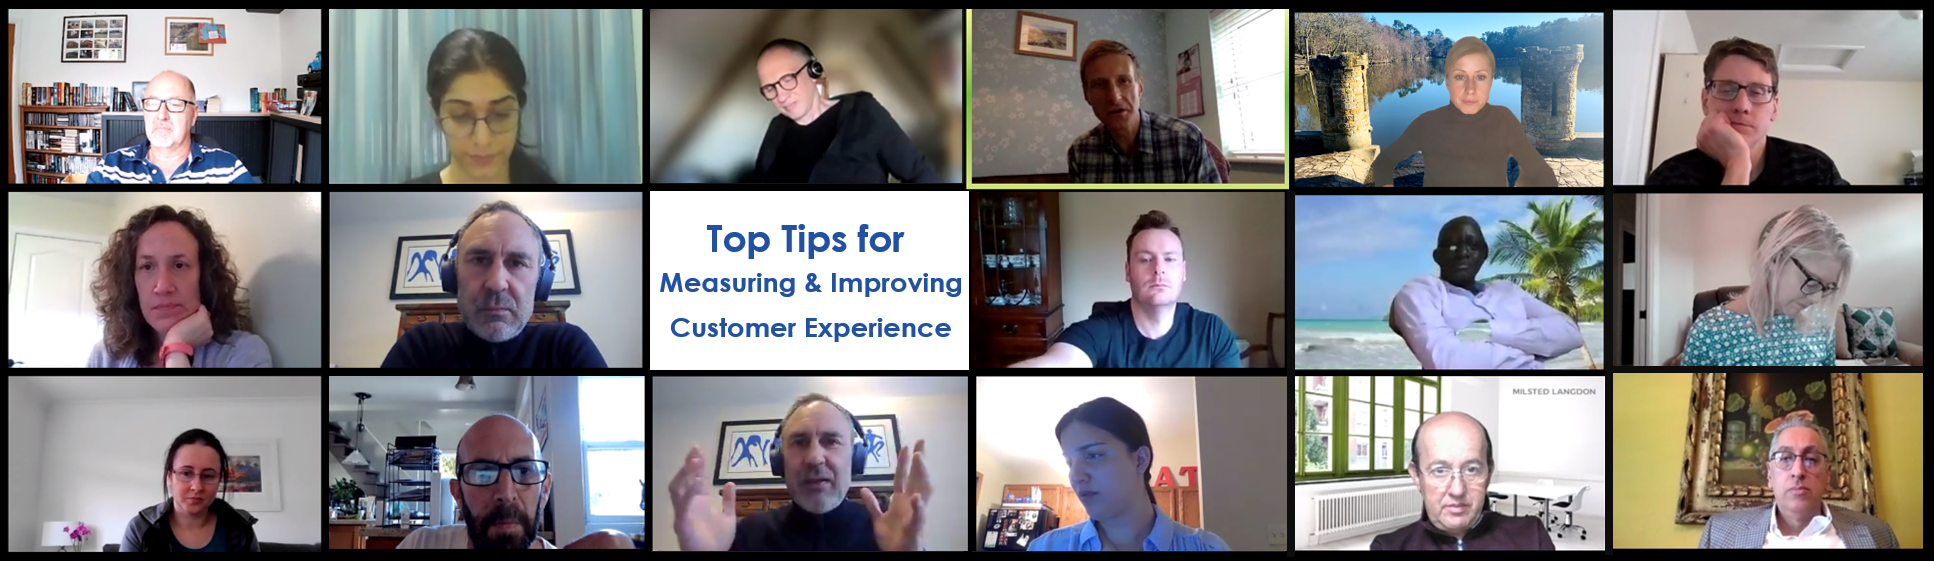 top-tips-for-customer-experience-montage.png